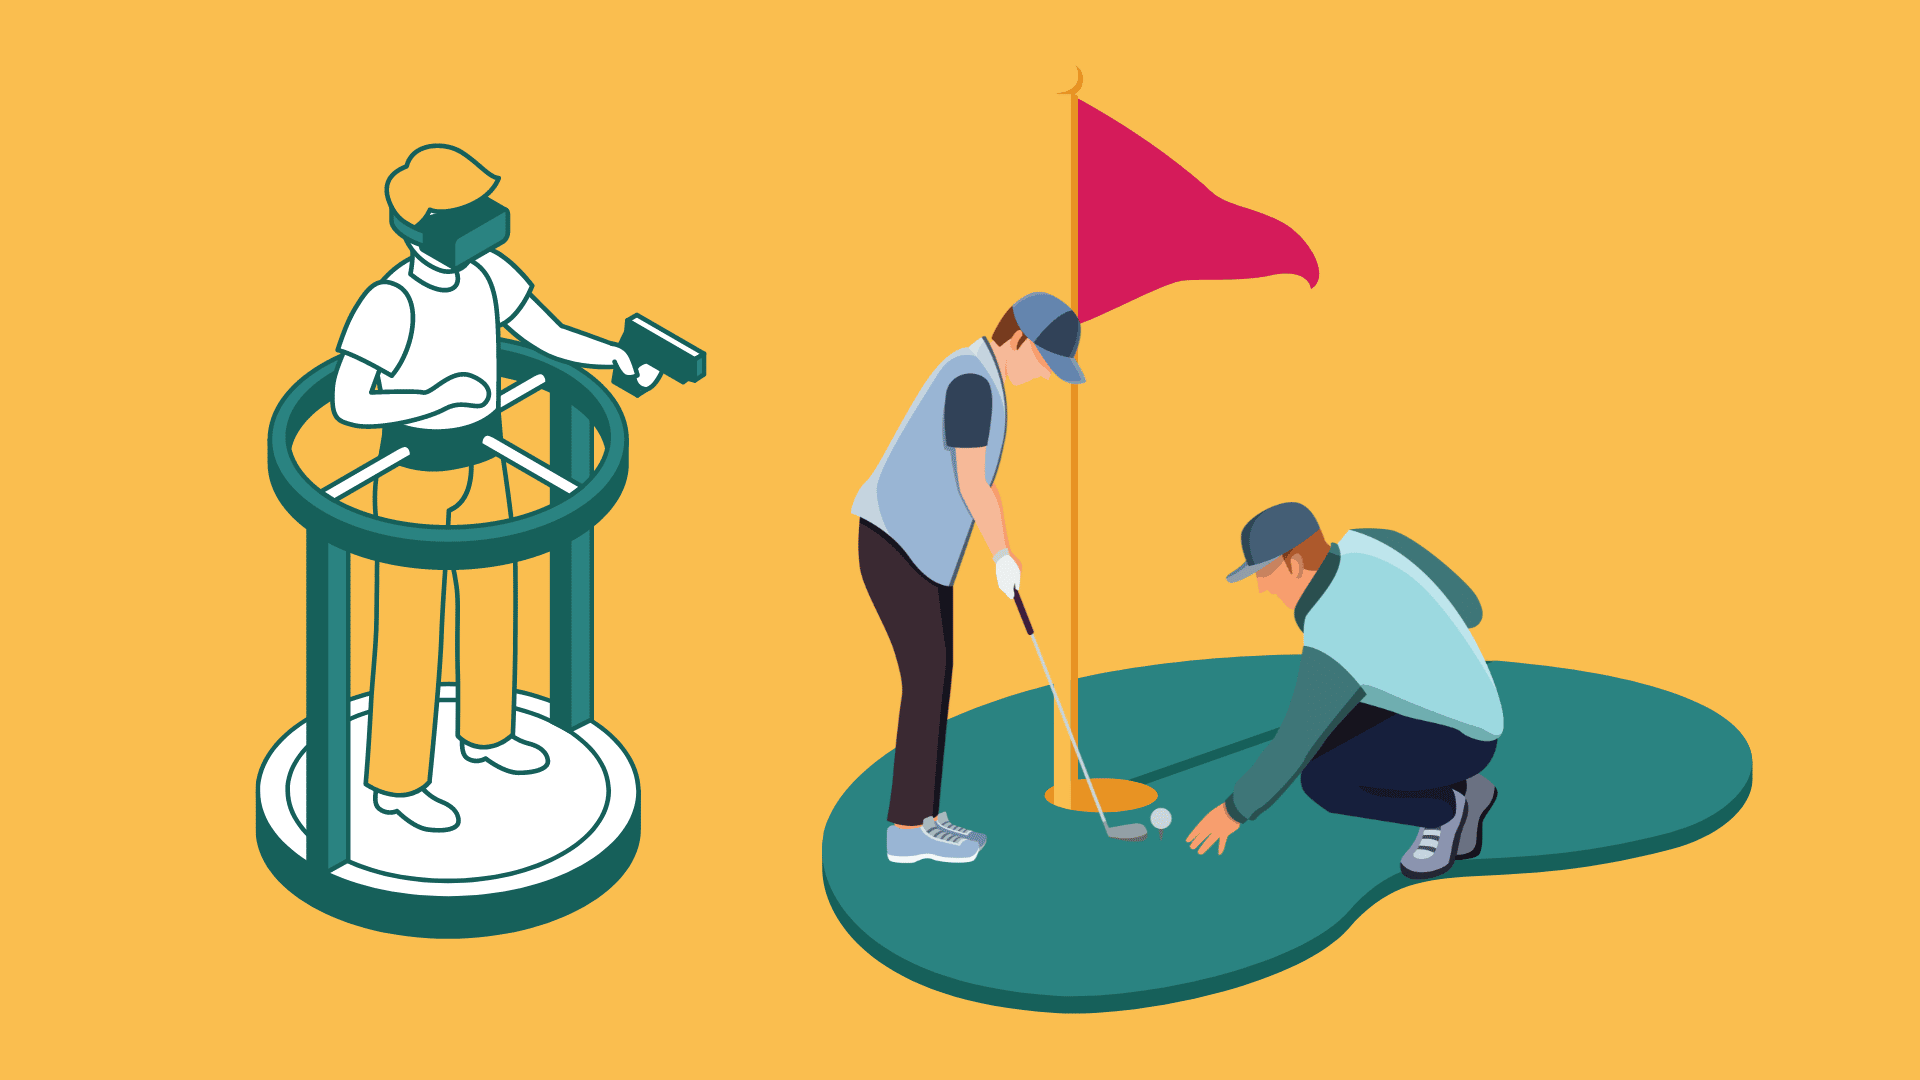 What are the benefits of using a golf simulator